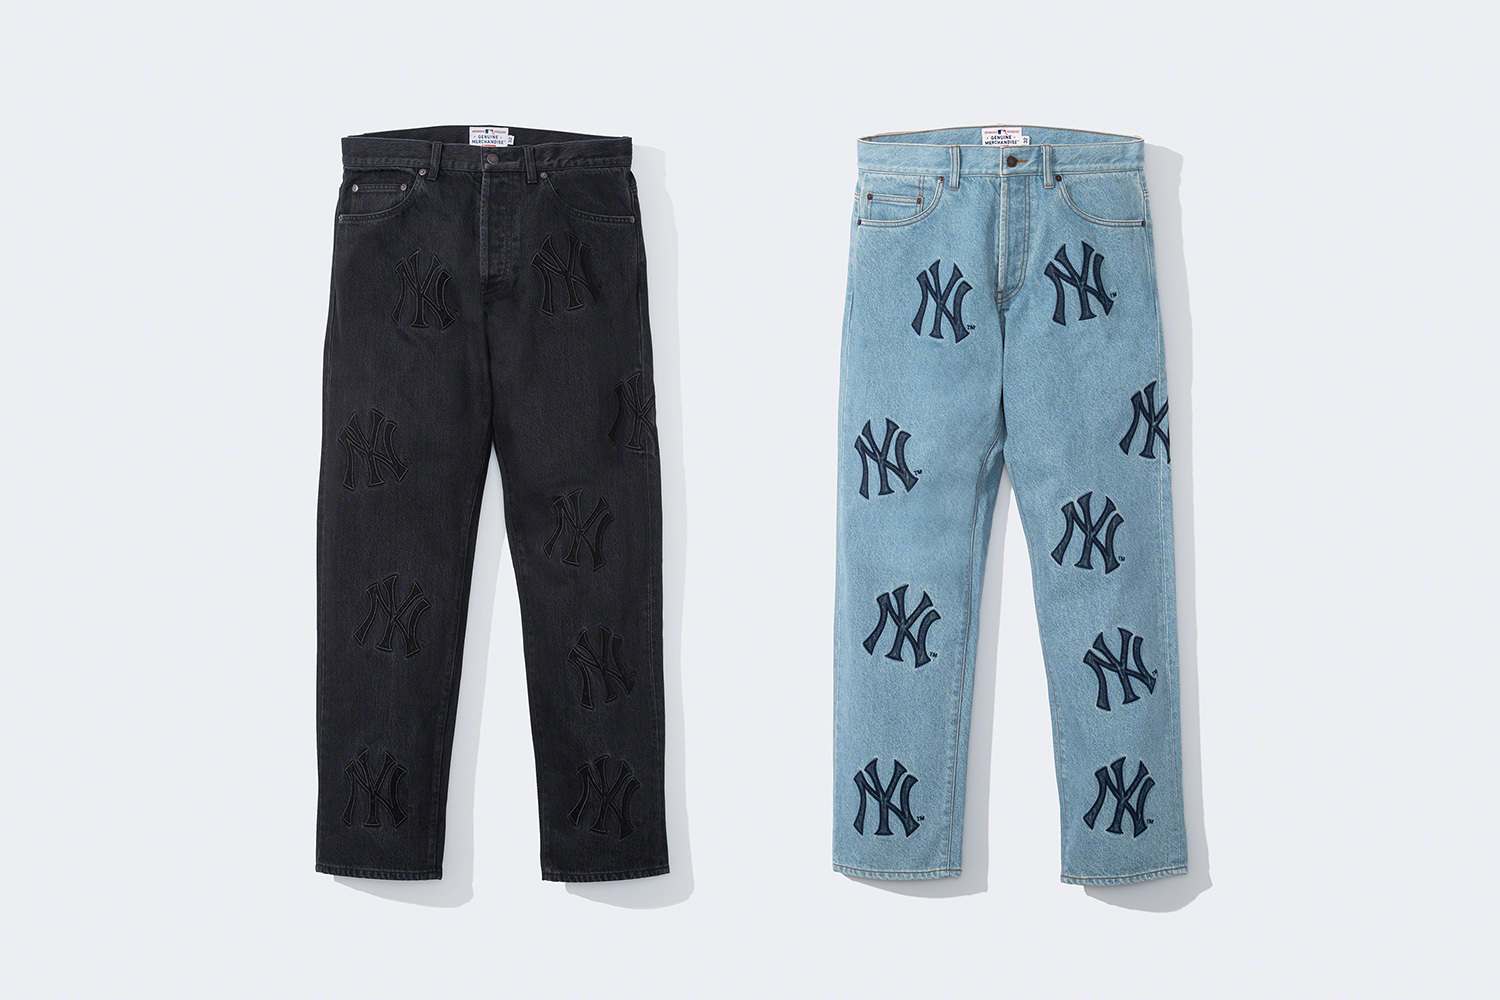 Supreme x New York Yankees FW21 Collection: Release Info